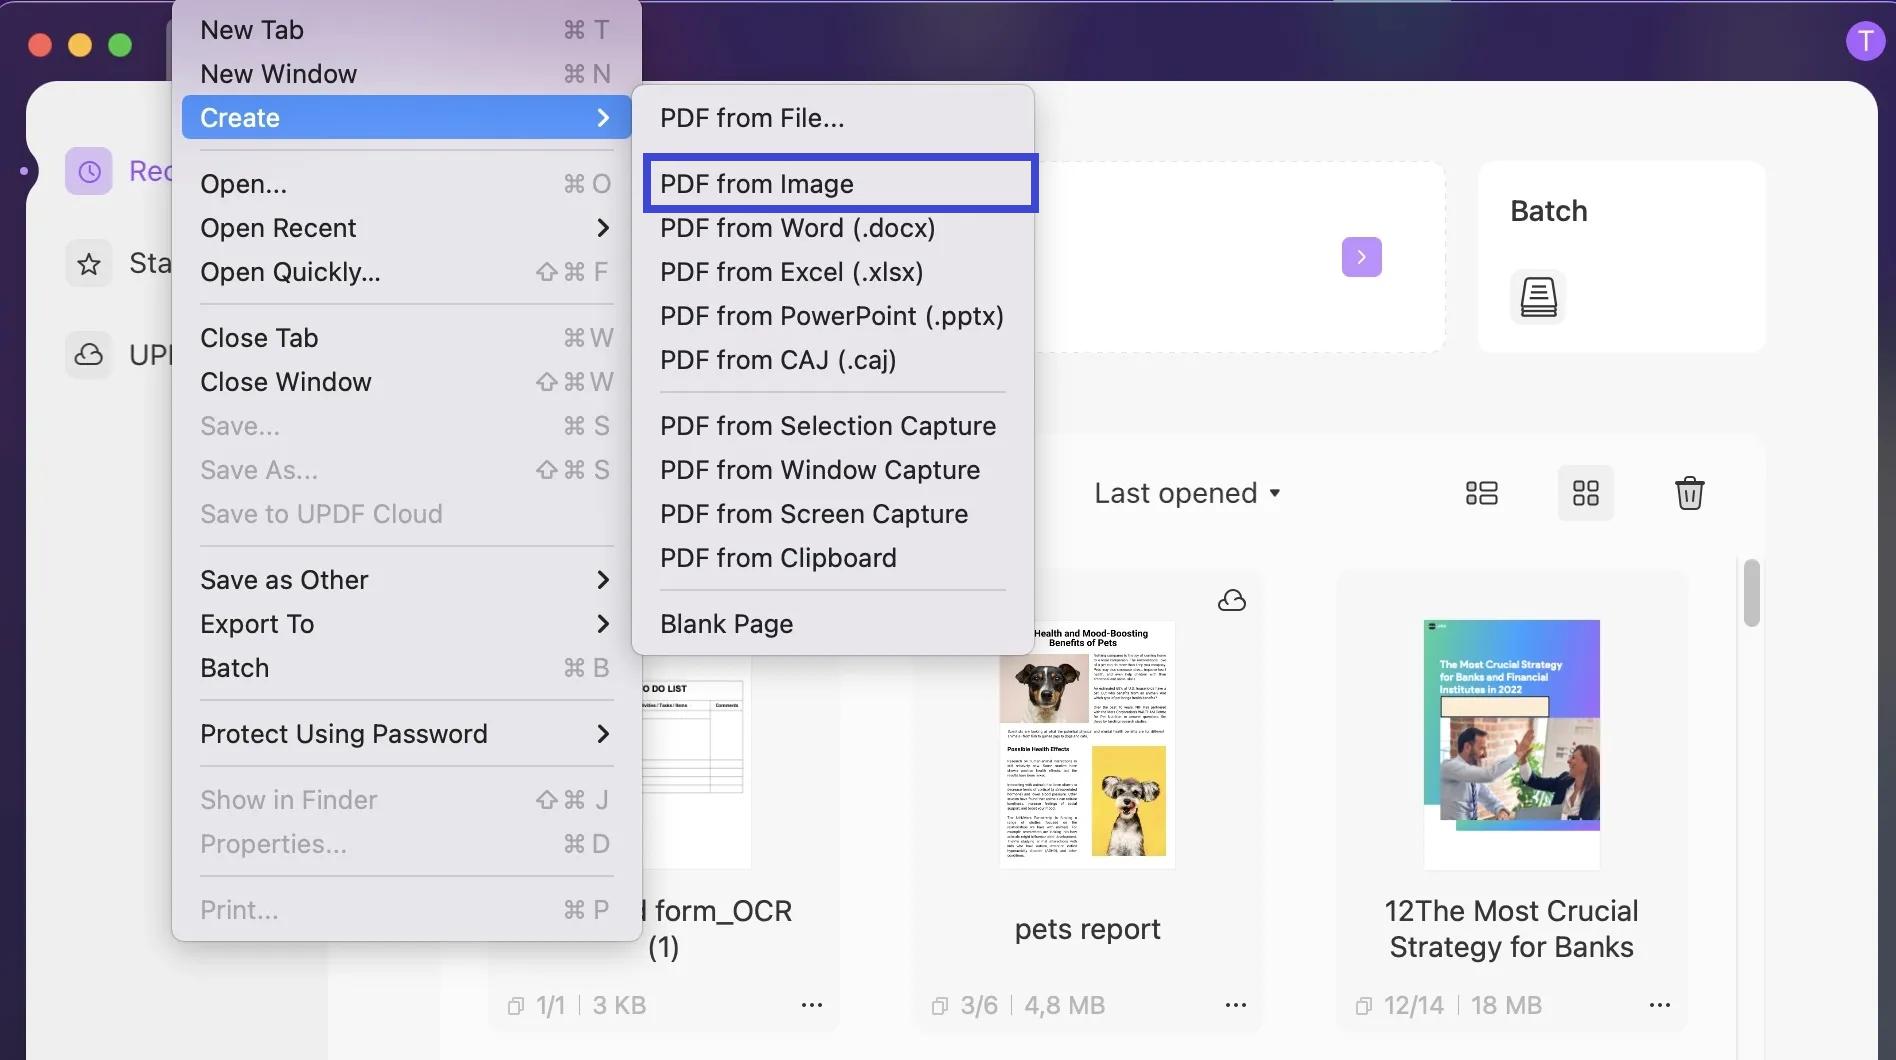 print screen to pdf Select PDF from Image.